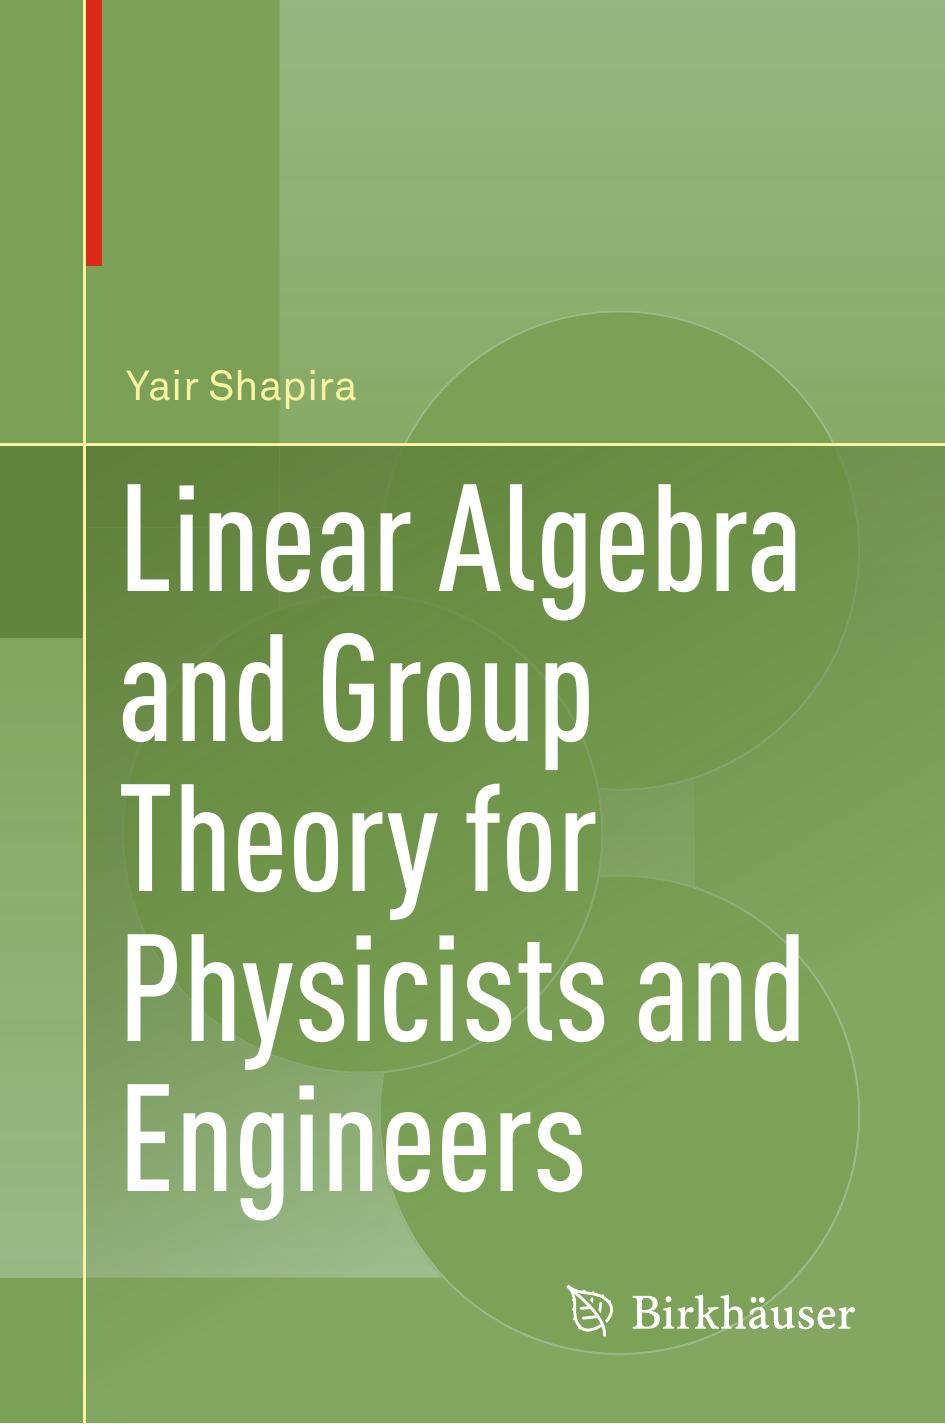 Linear Algebra and Group Theory for Physicists and Engineers by Yair Shapira